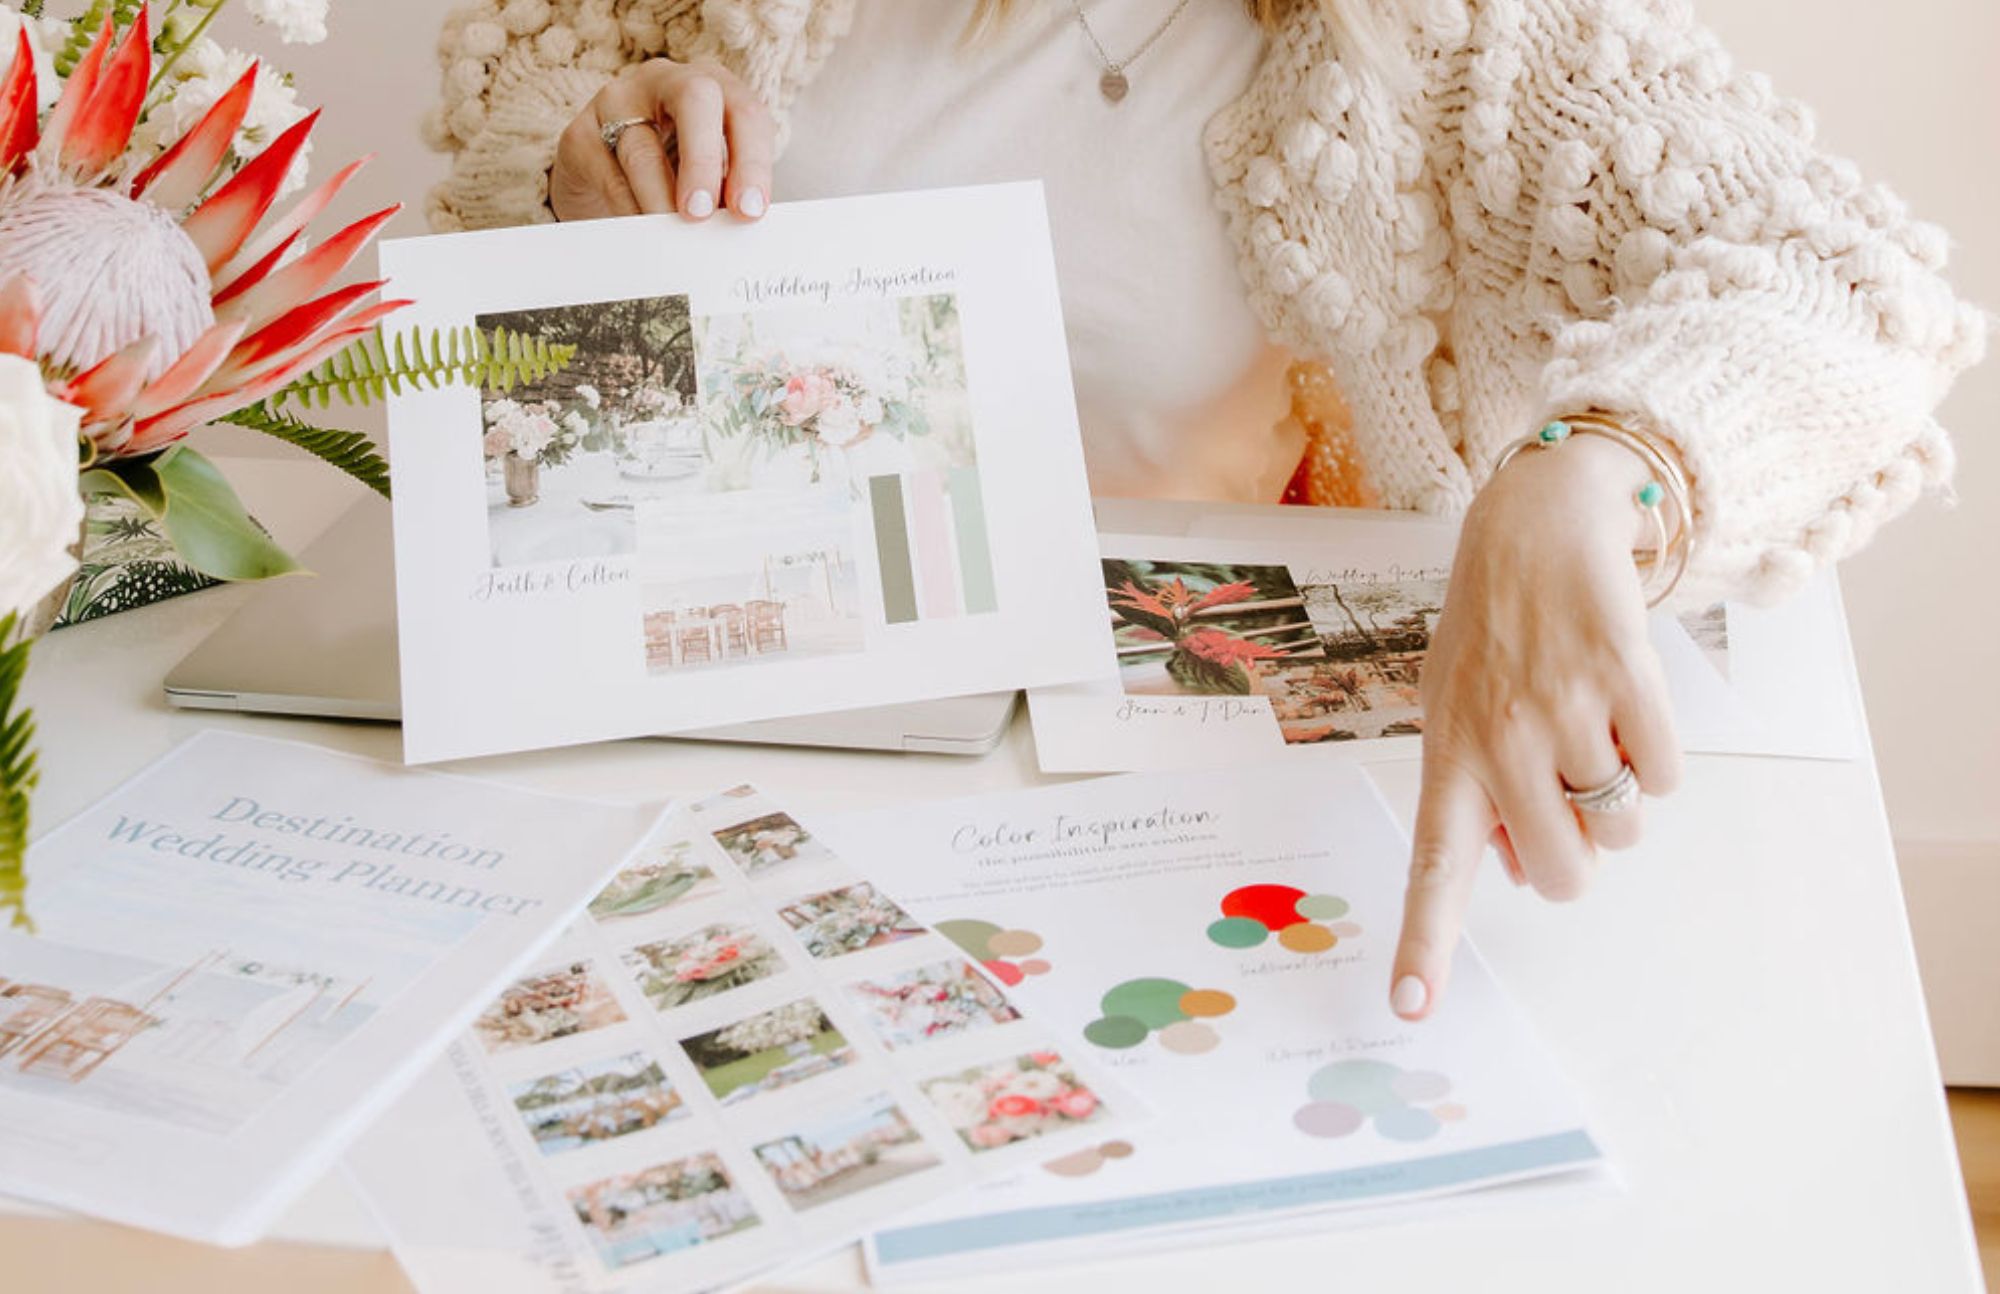 Wedding Planner Reviewing Destination wedding planning documents and color schemes